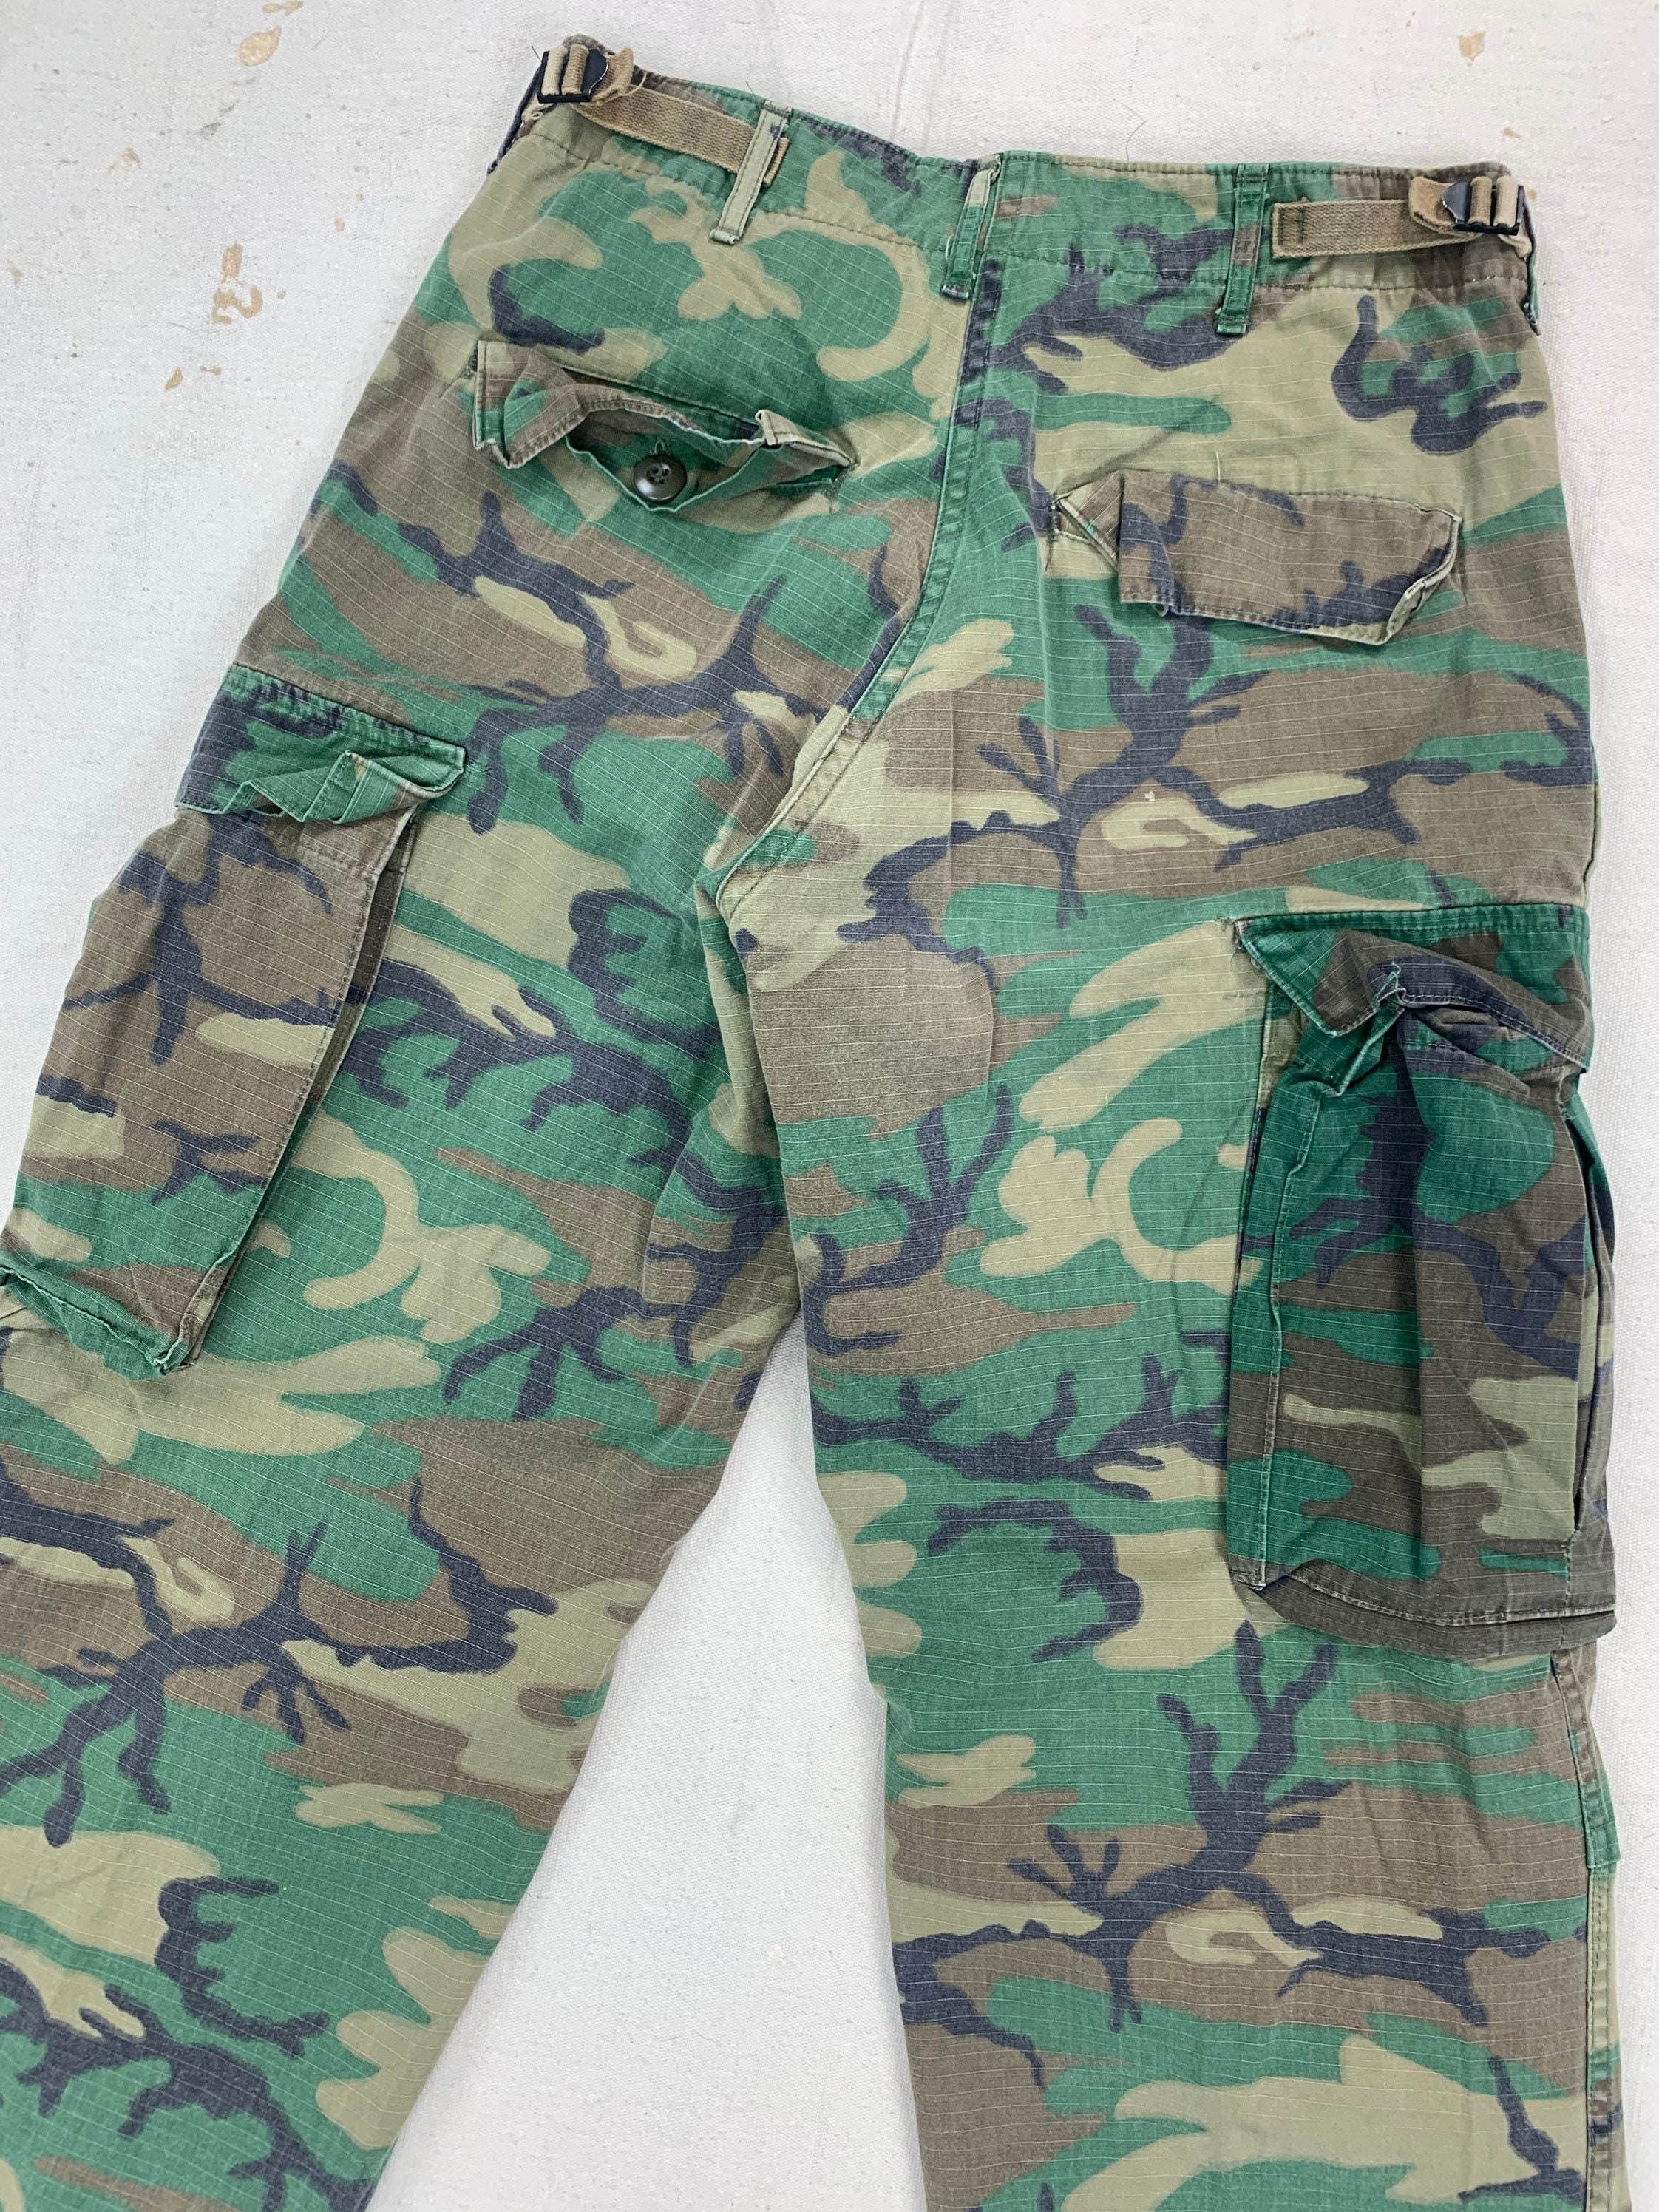 Small-Long RDF ERDL Camo Trousers 70s USA Vintage Military | Etsy